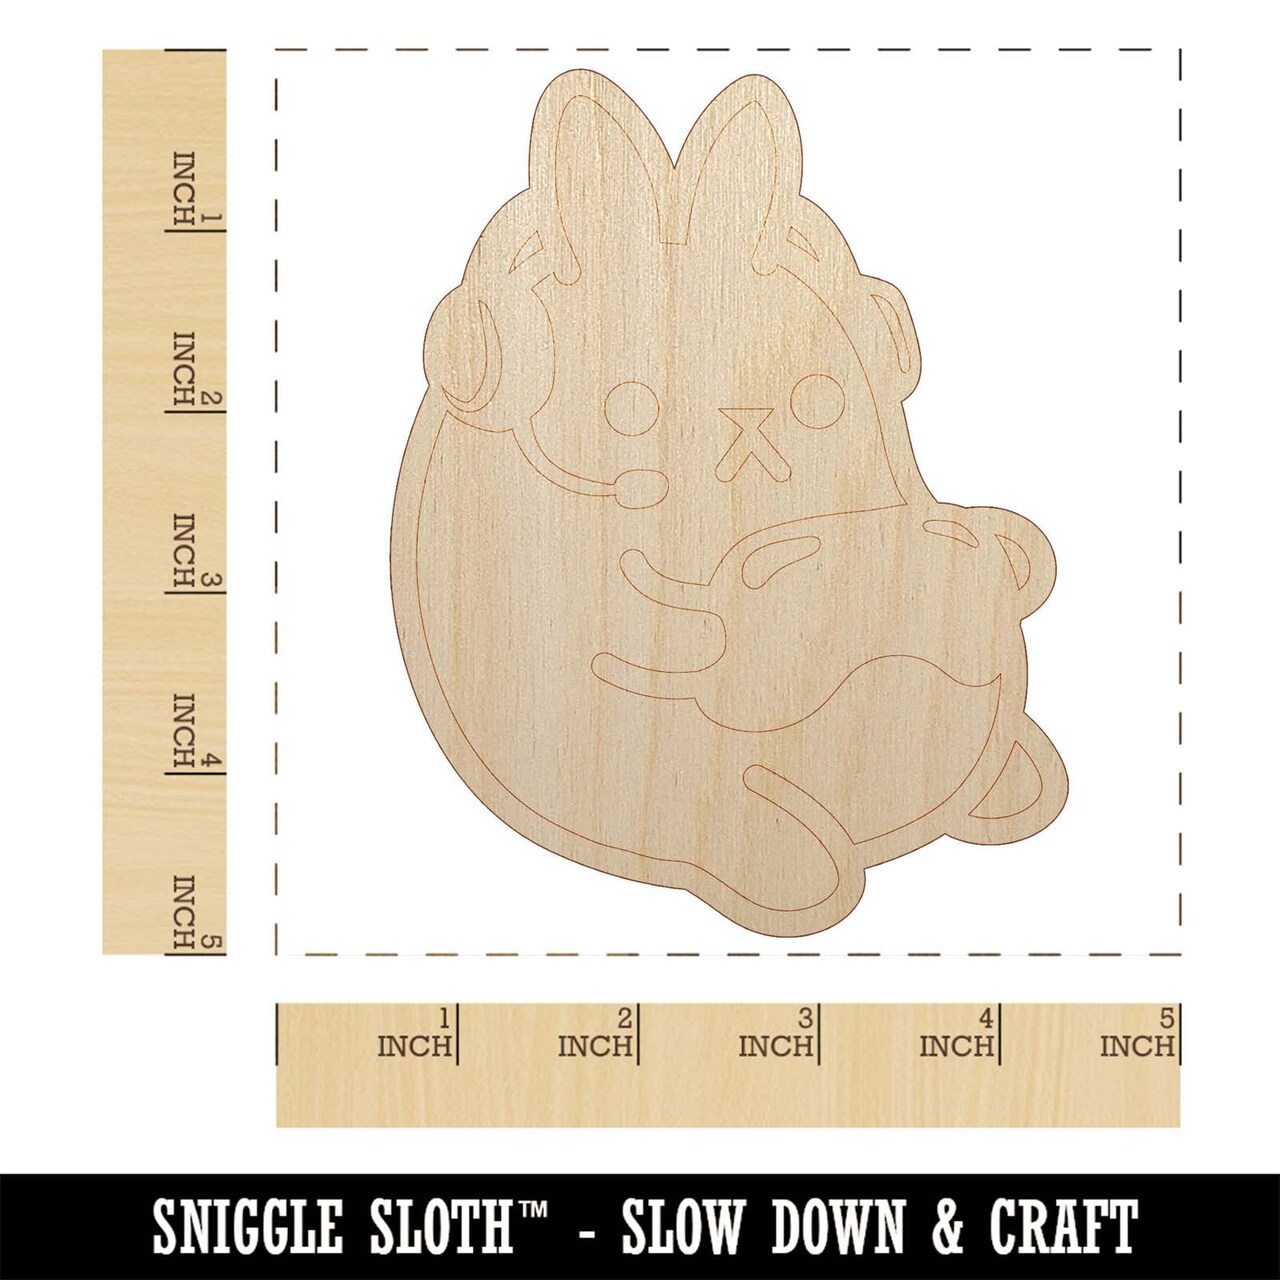 Geek Gamer Bunny Rabbit Playing Console Games Unfinished Wood Shape Piece Cutout for DIY Craft Projects